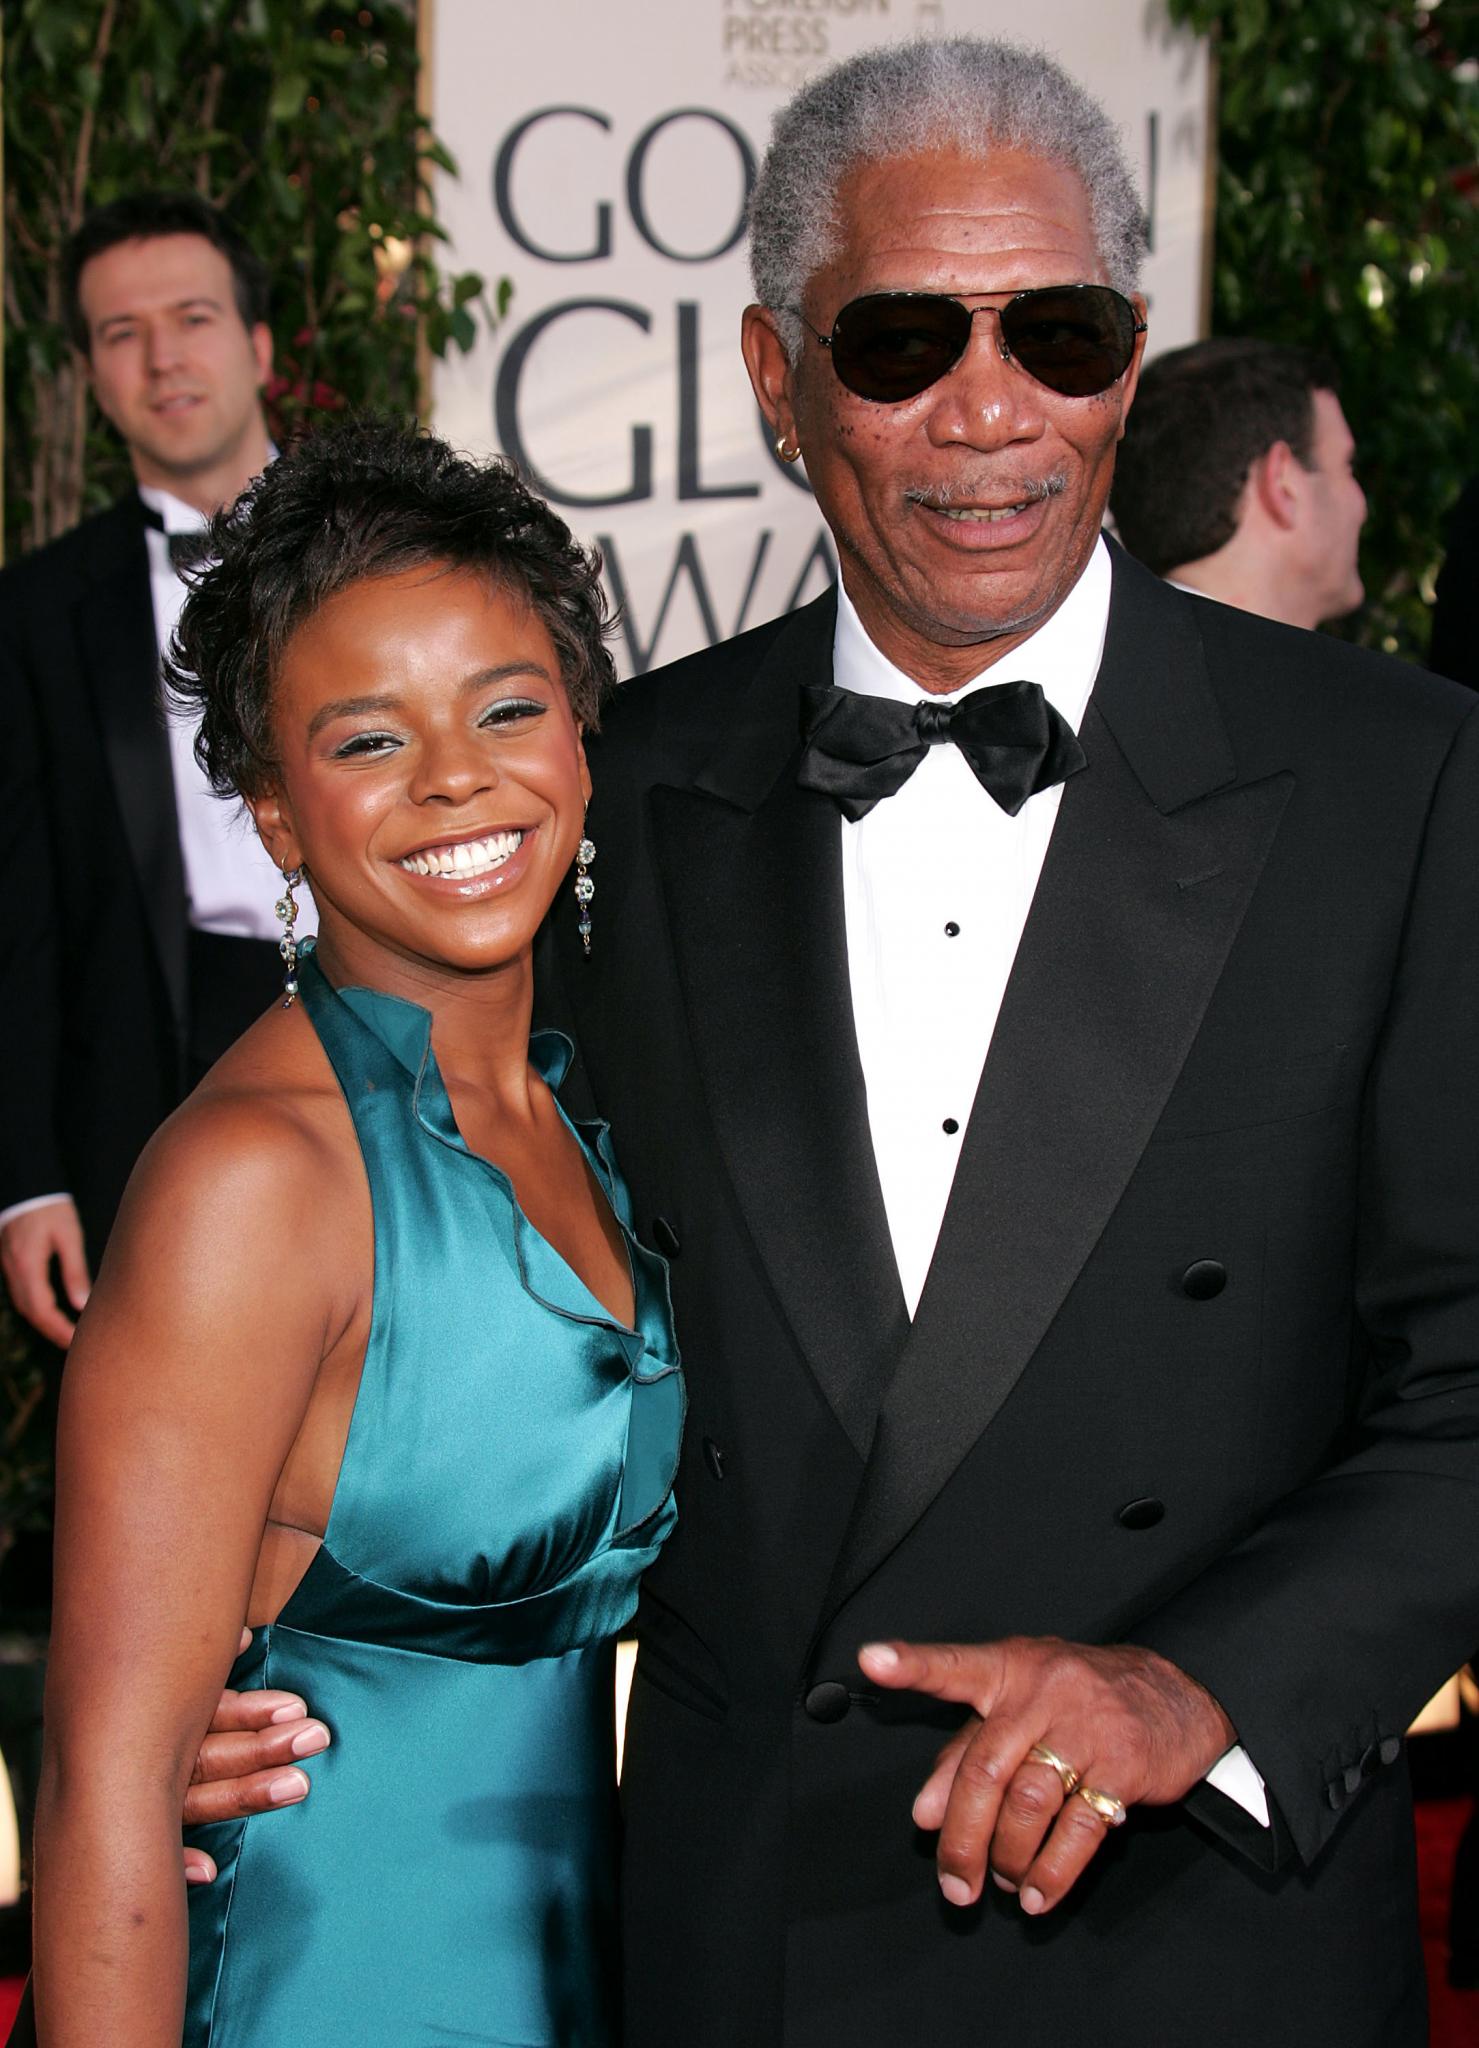 Witness Shares Last Words From Morgan Freeman's Granddaughter Before She Was Murdered
